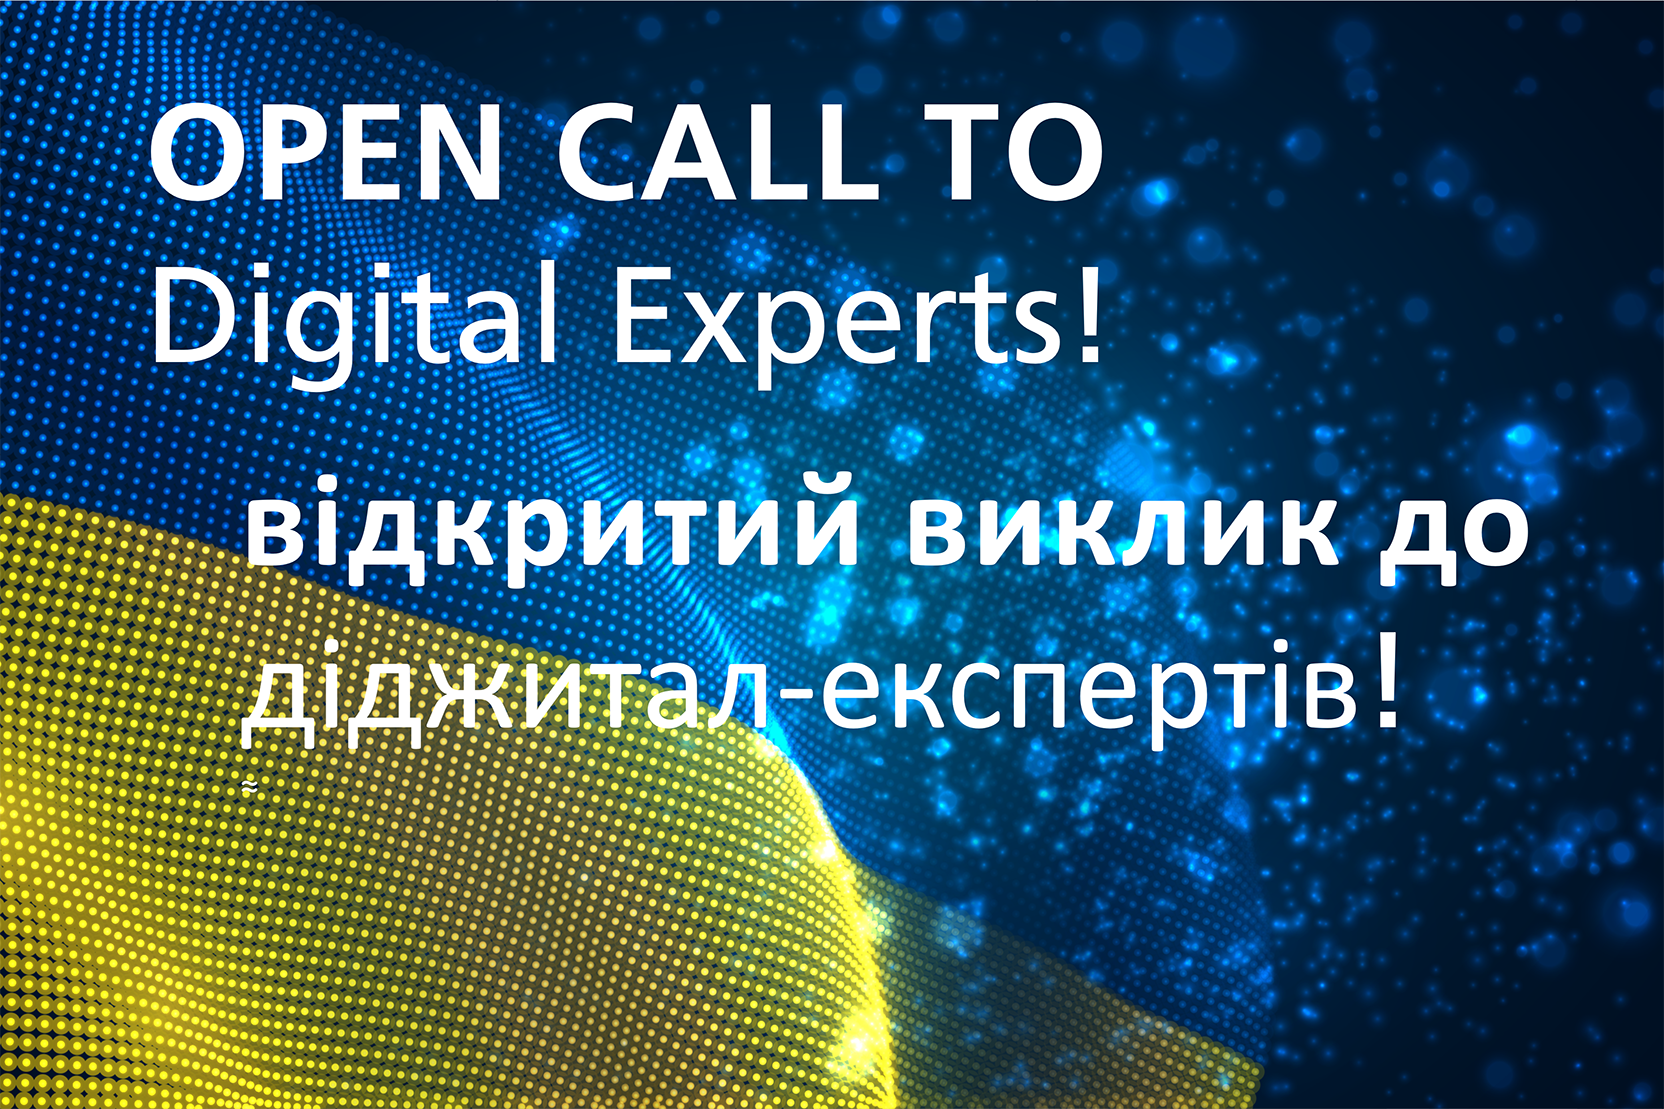 Open call to digital experts